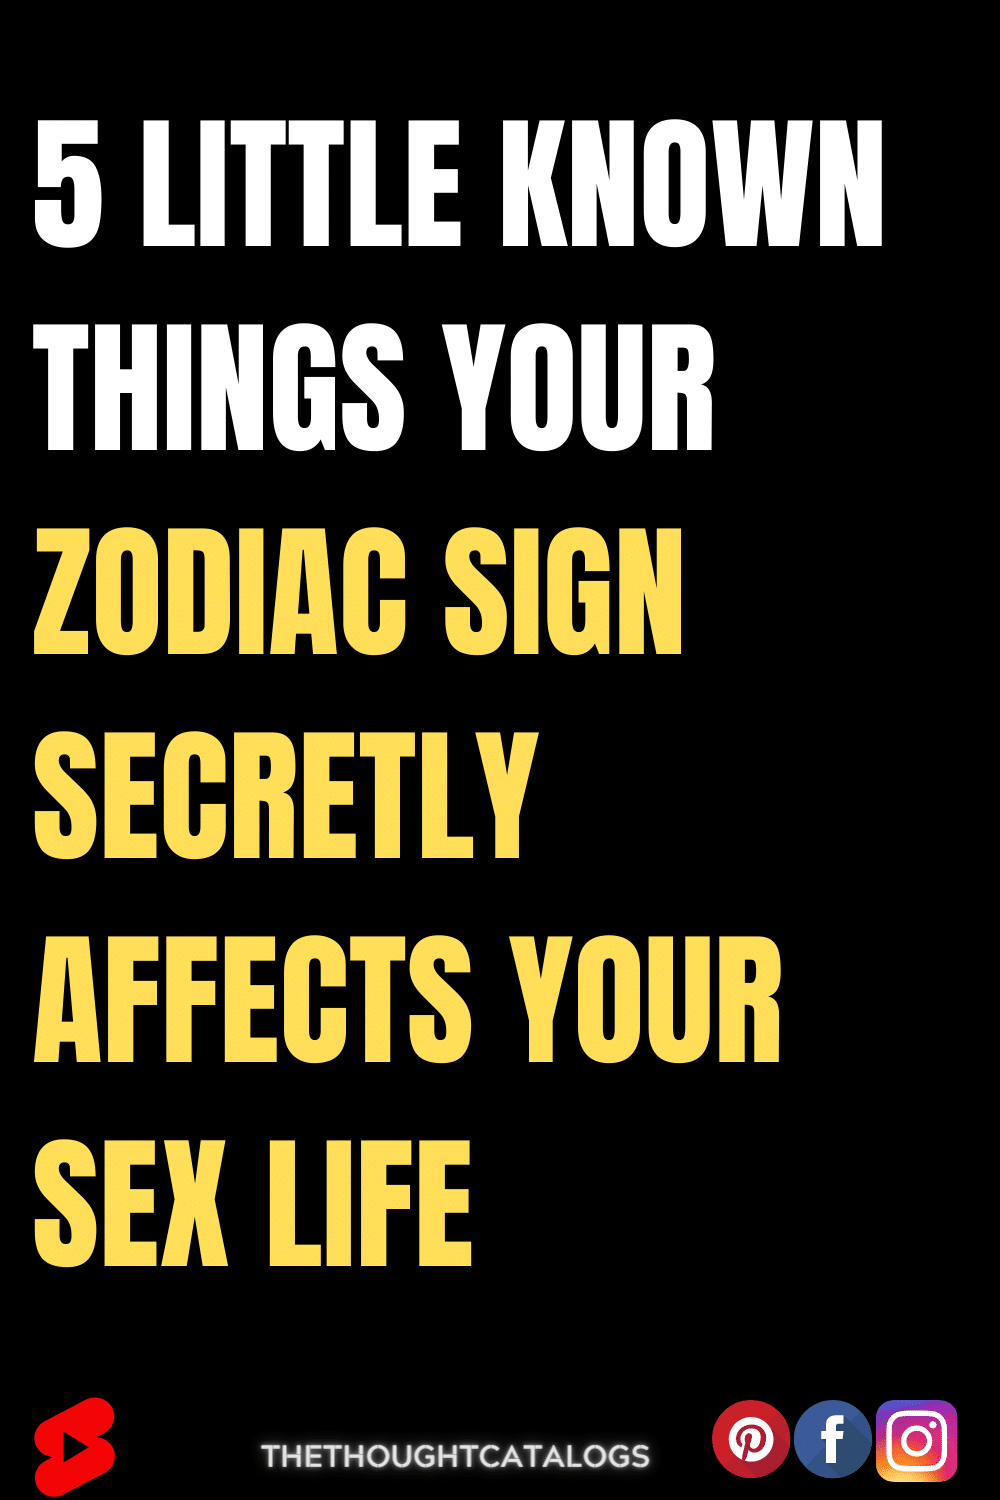 5 Little Known things Your Zodiac Sign Secretly Affects Your S*x Life ...